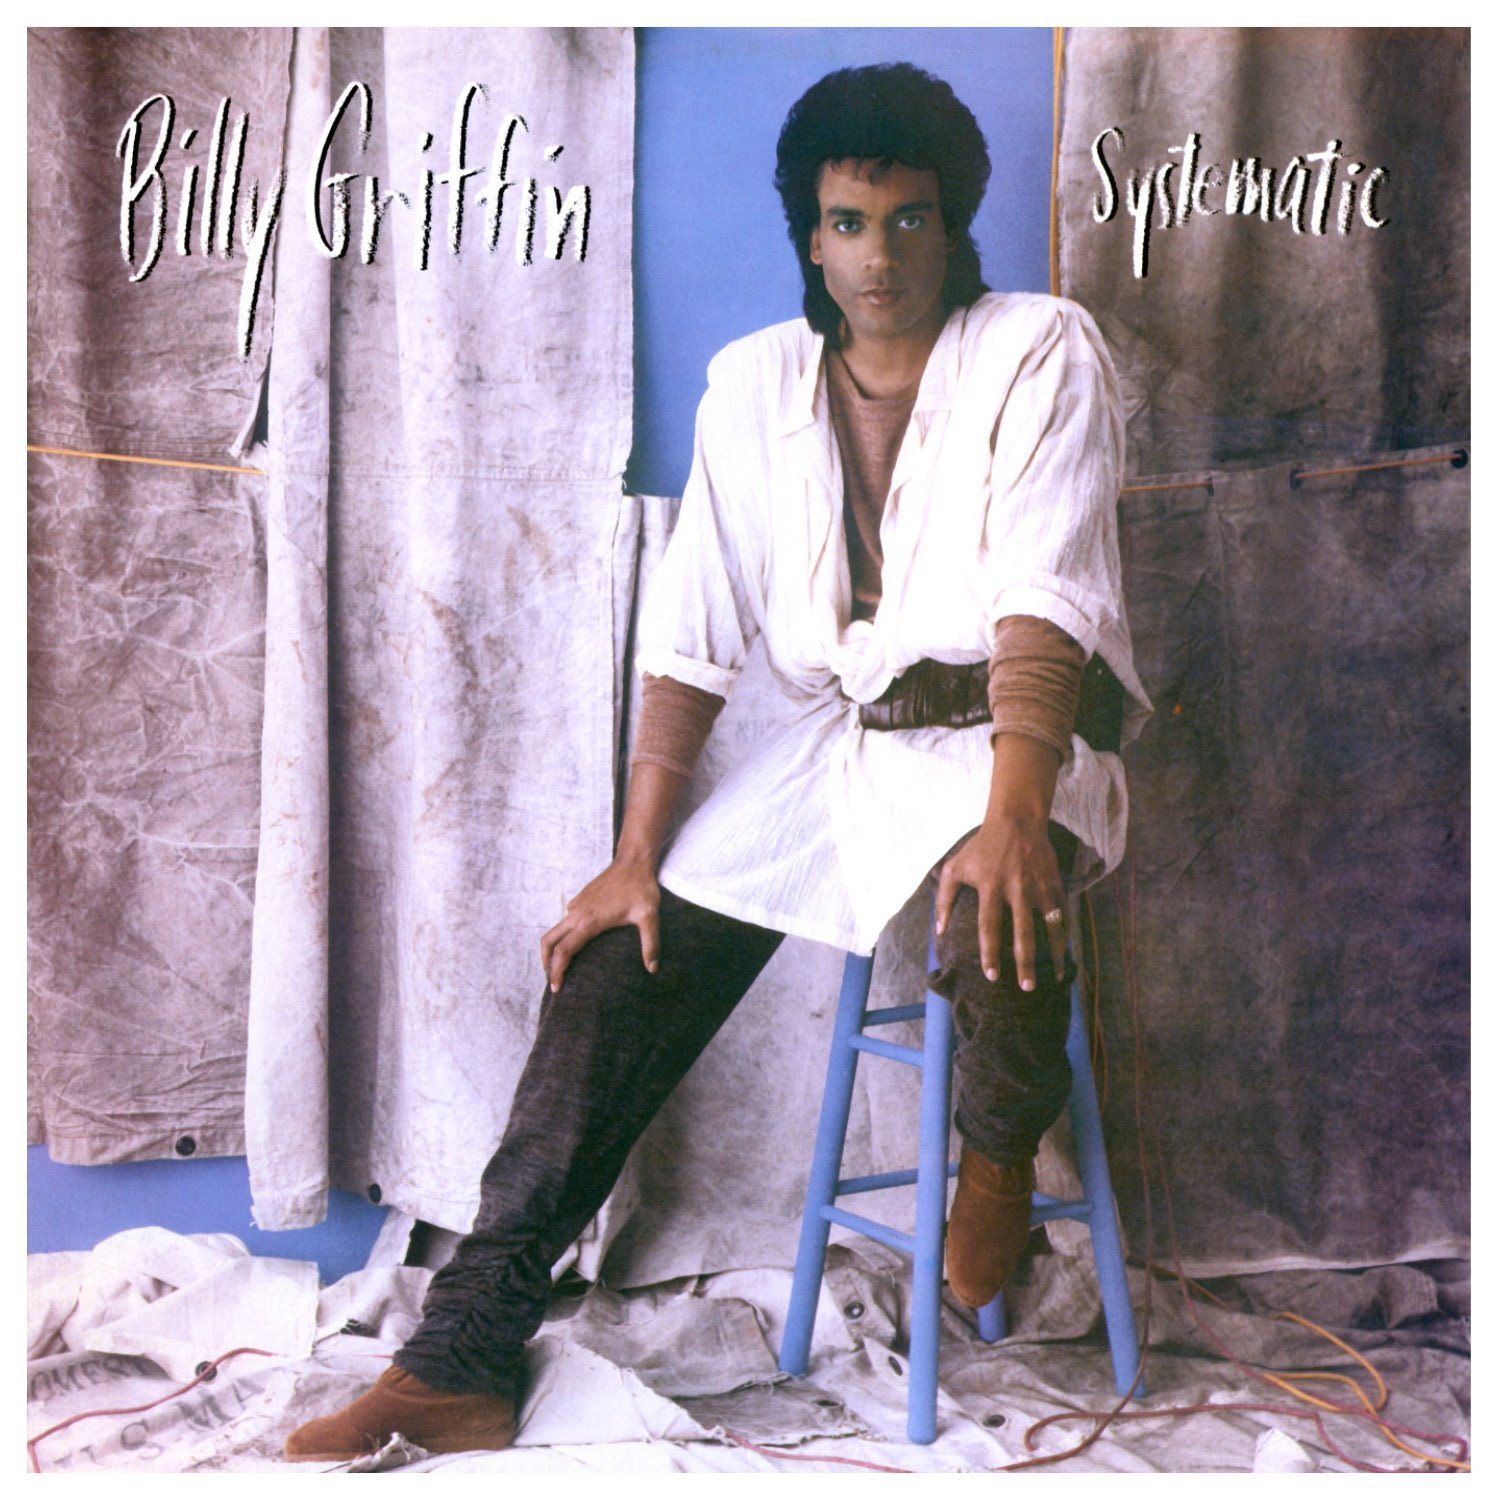 Billy Griffin - Systematic CD NEUF - Imagen 1 de 1